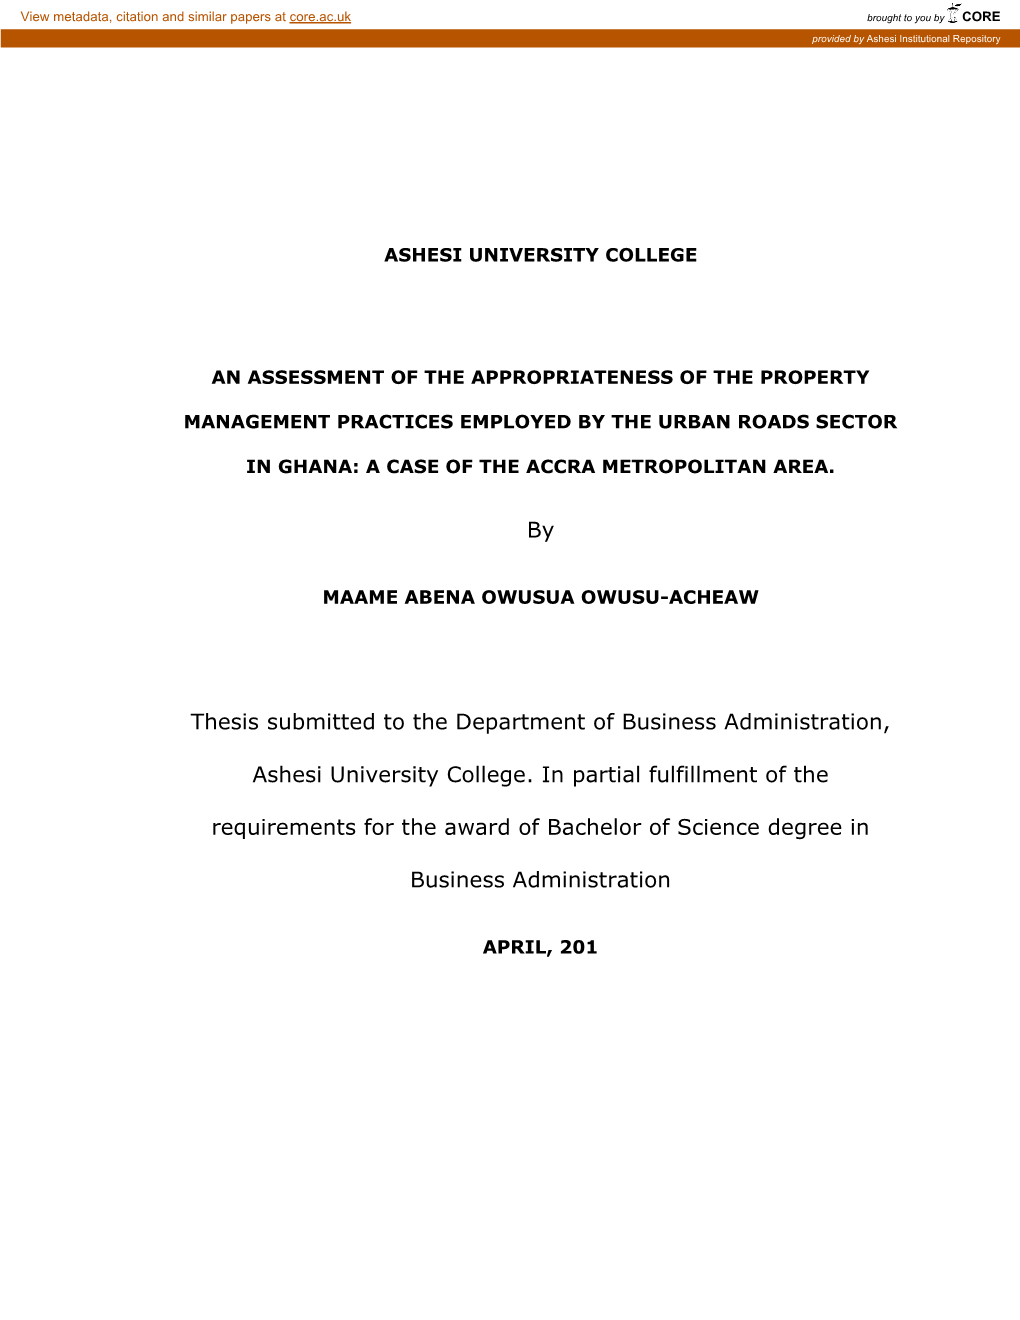 By Thesis Submitted to the Department of Business Administration, Ashesi